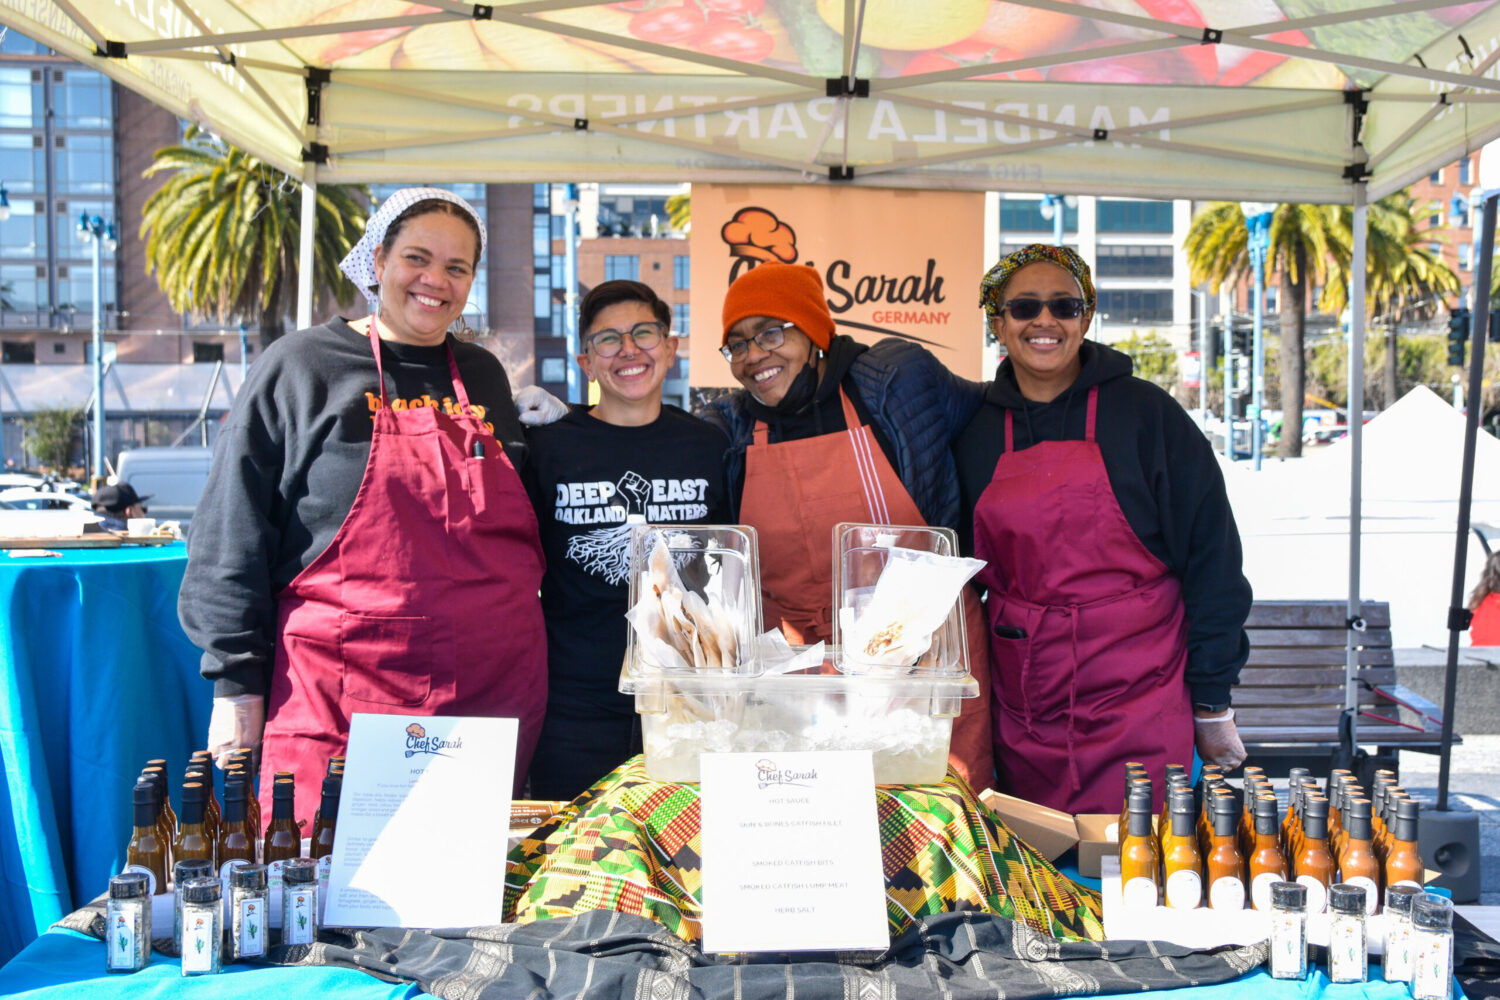 Chef Sarah Germany and her team at their booth at the farmers market